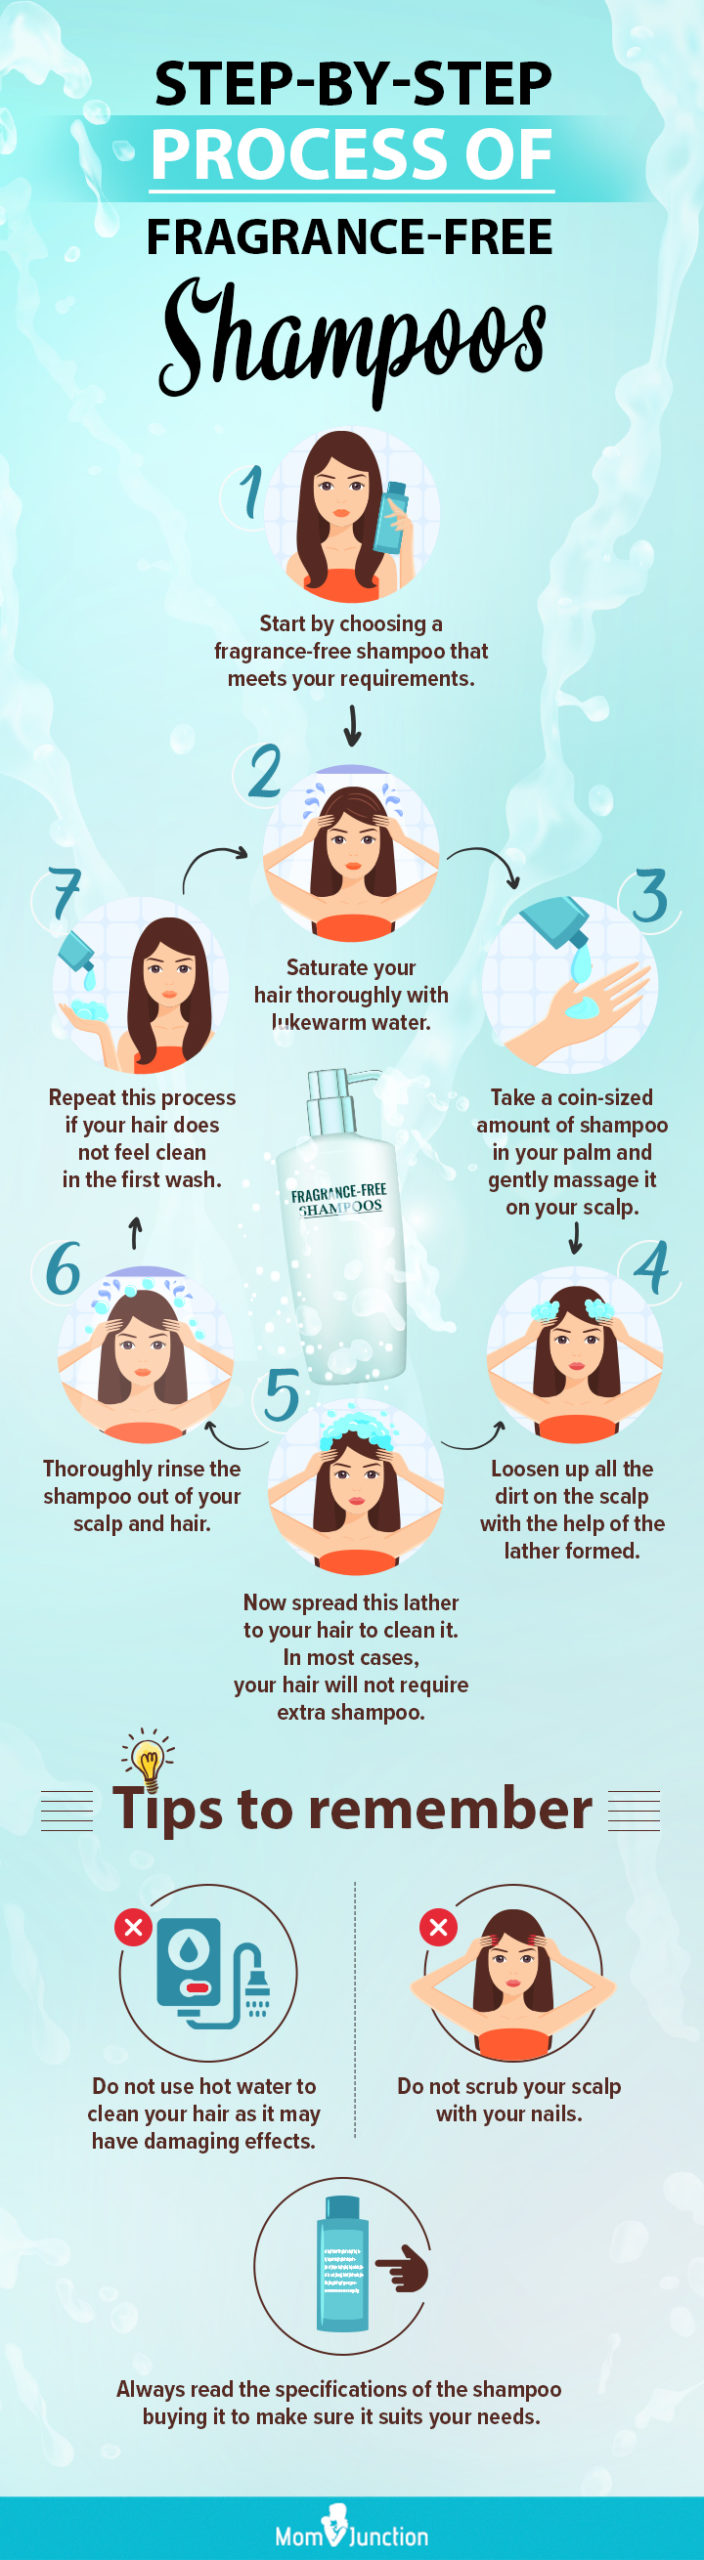 Infographic: How To Use Fragrance-Free Shampoos?